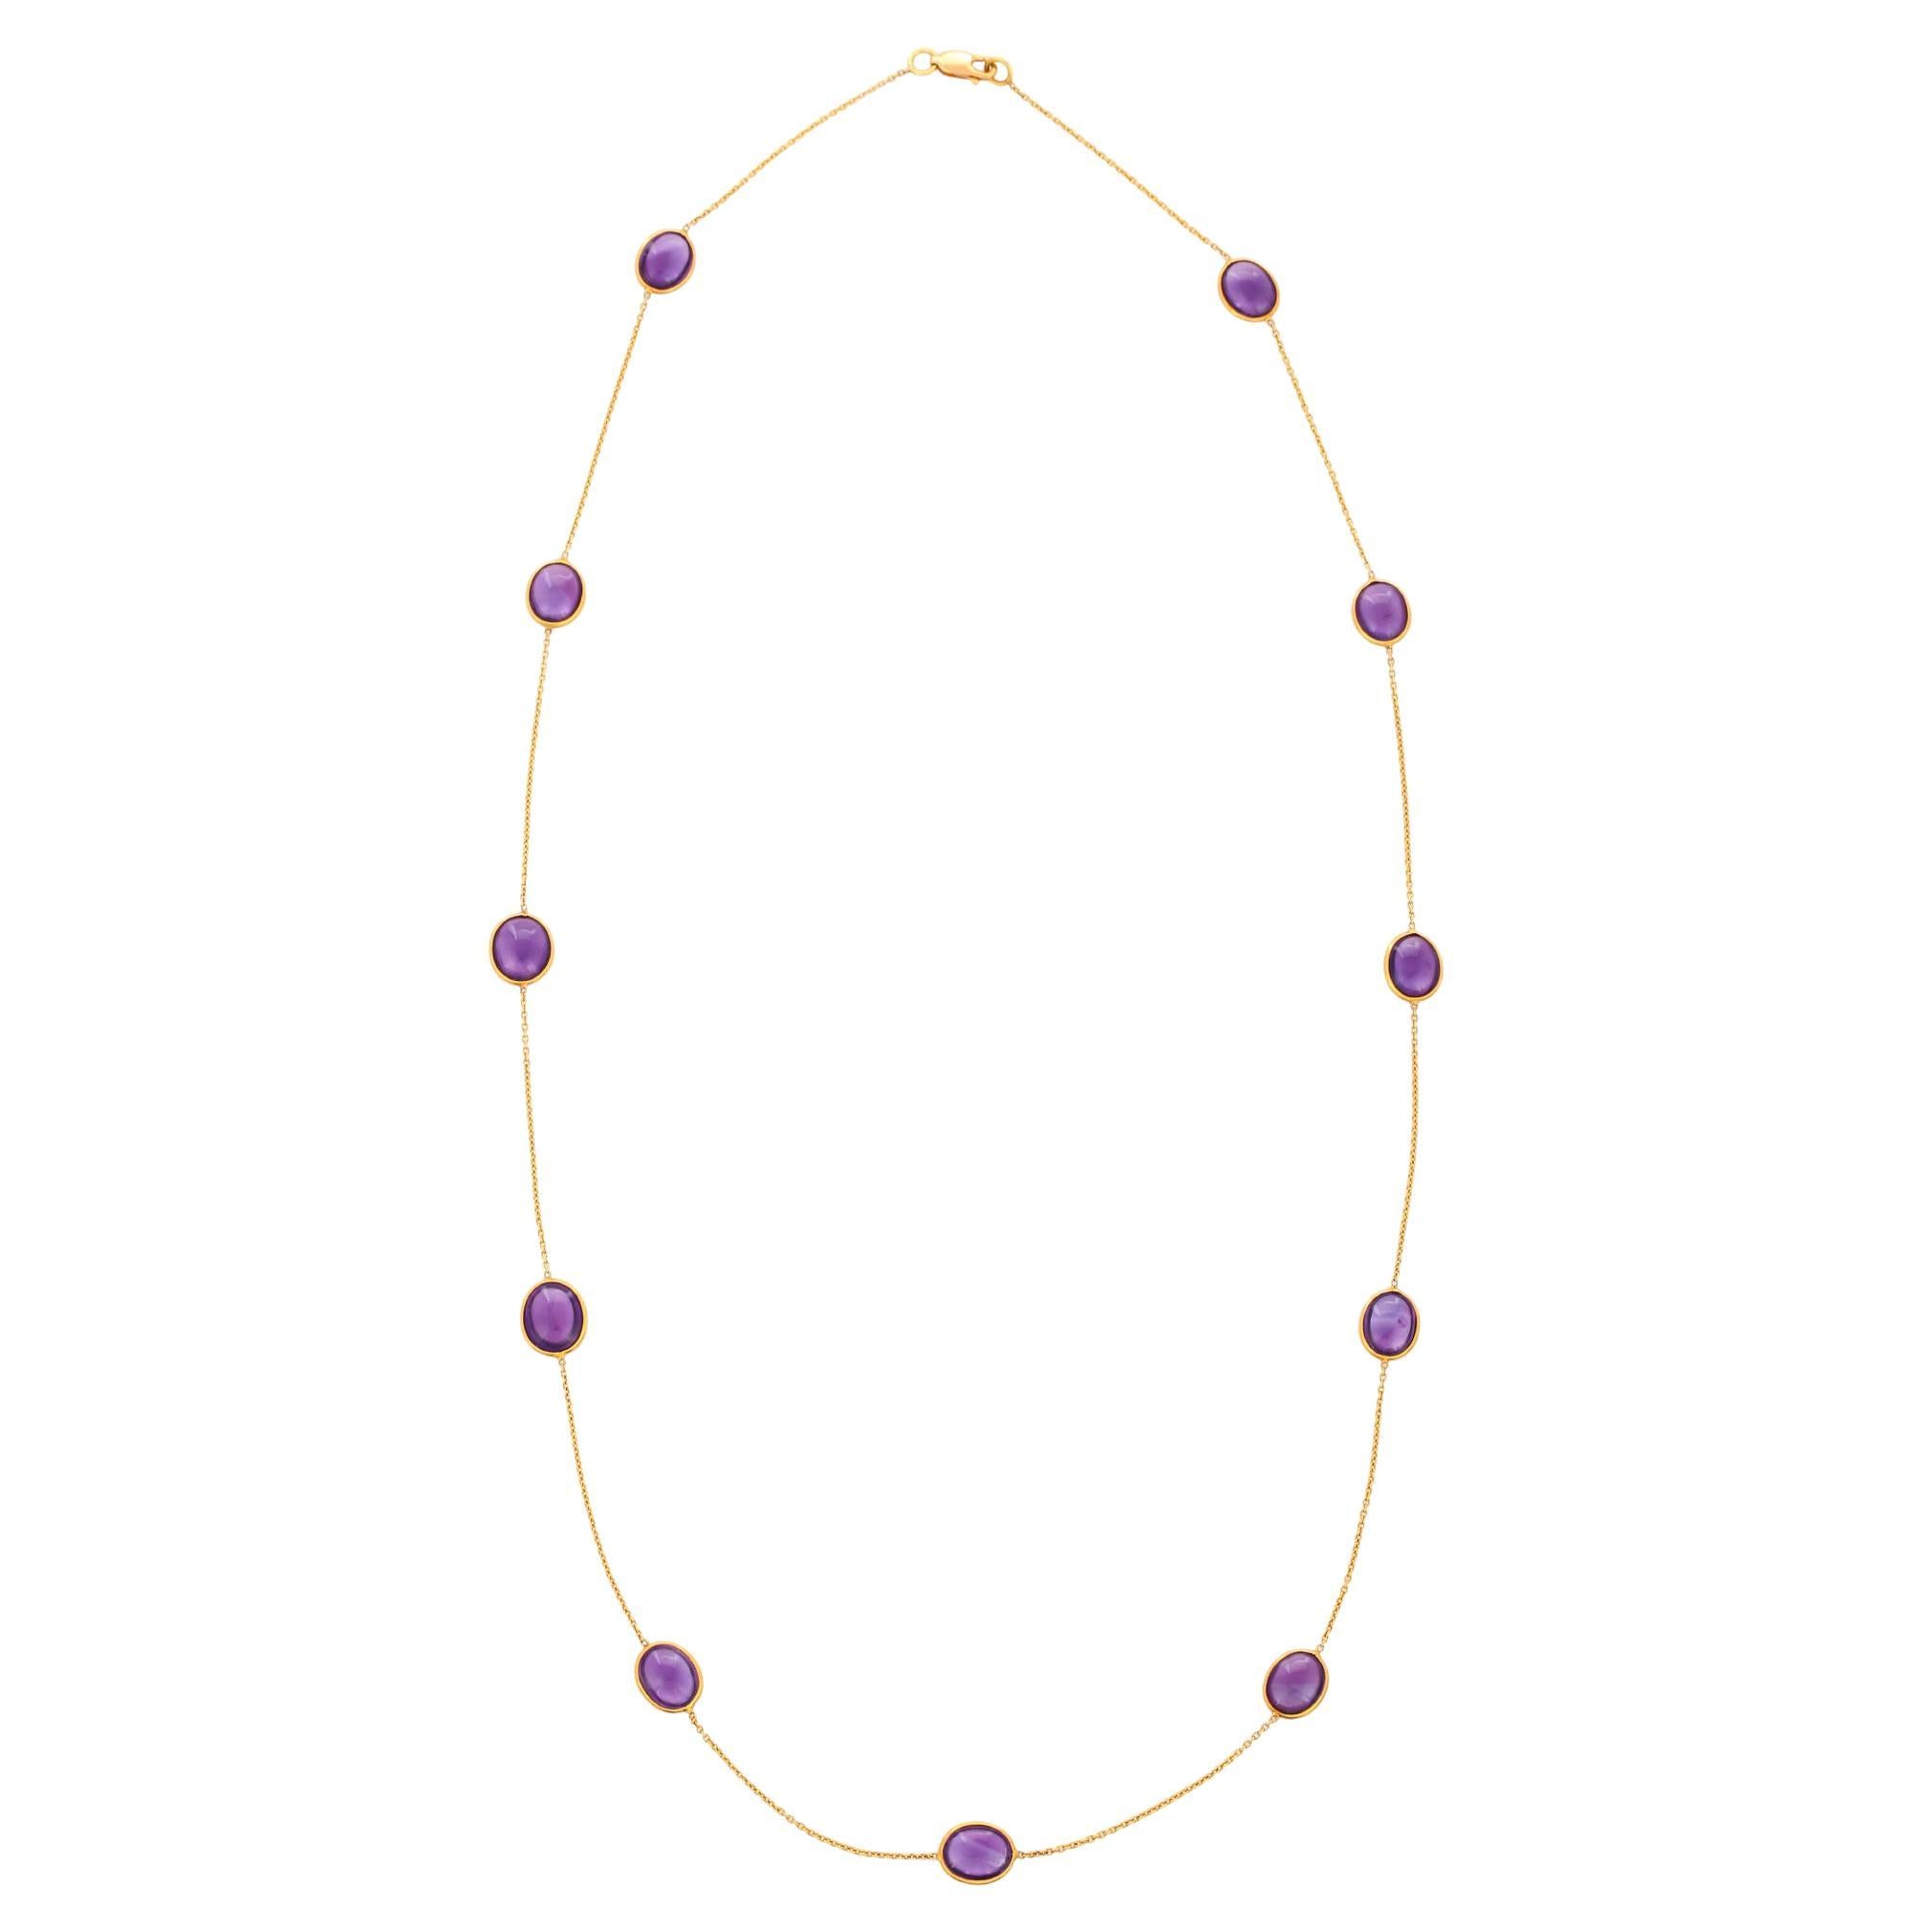 Modern 25.5 Ct Oval Amethyst Chain Necklace Enhancer in 18K Yellow Gold For Sale